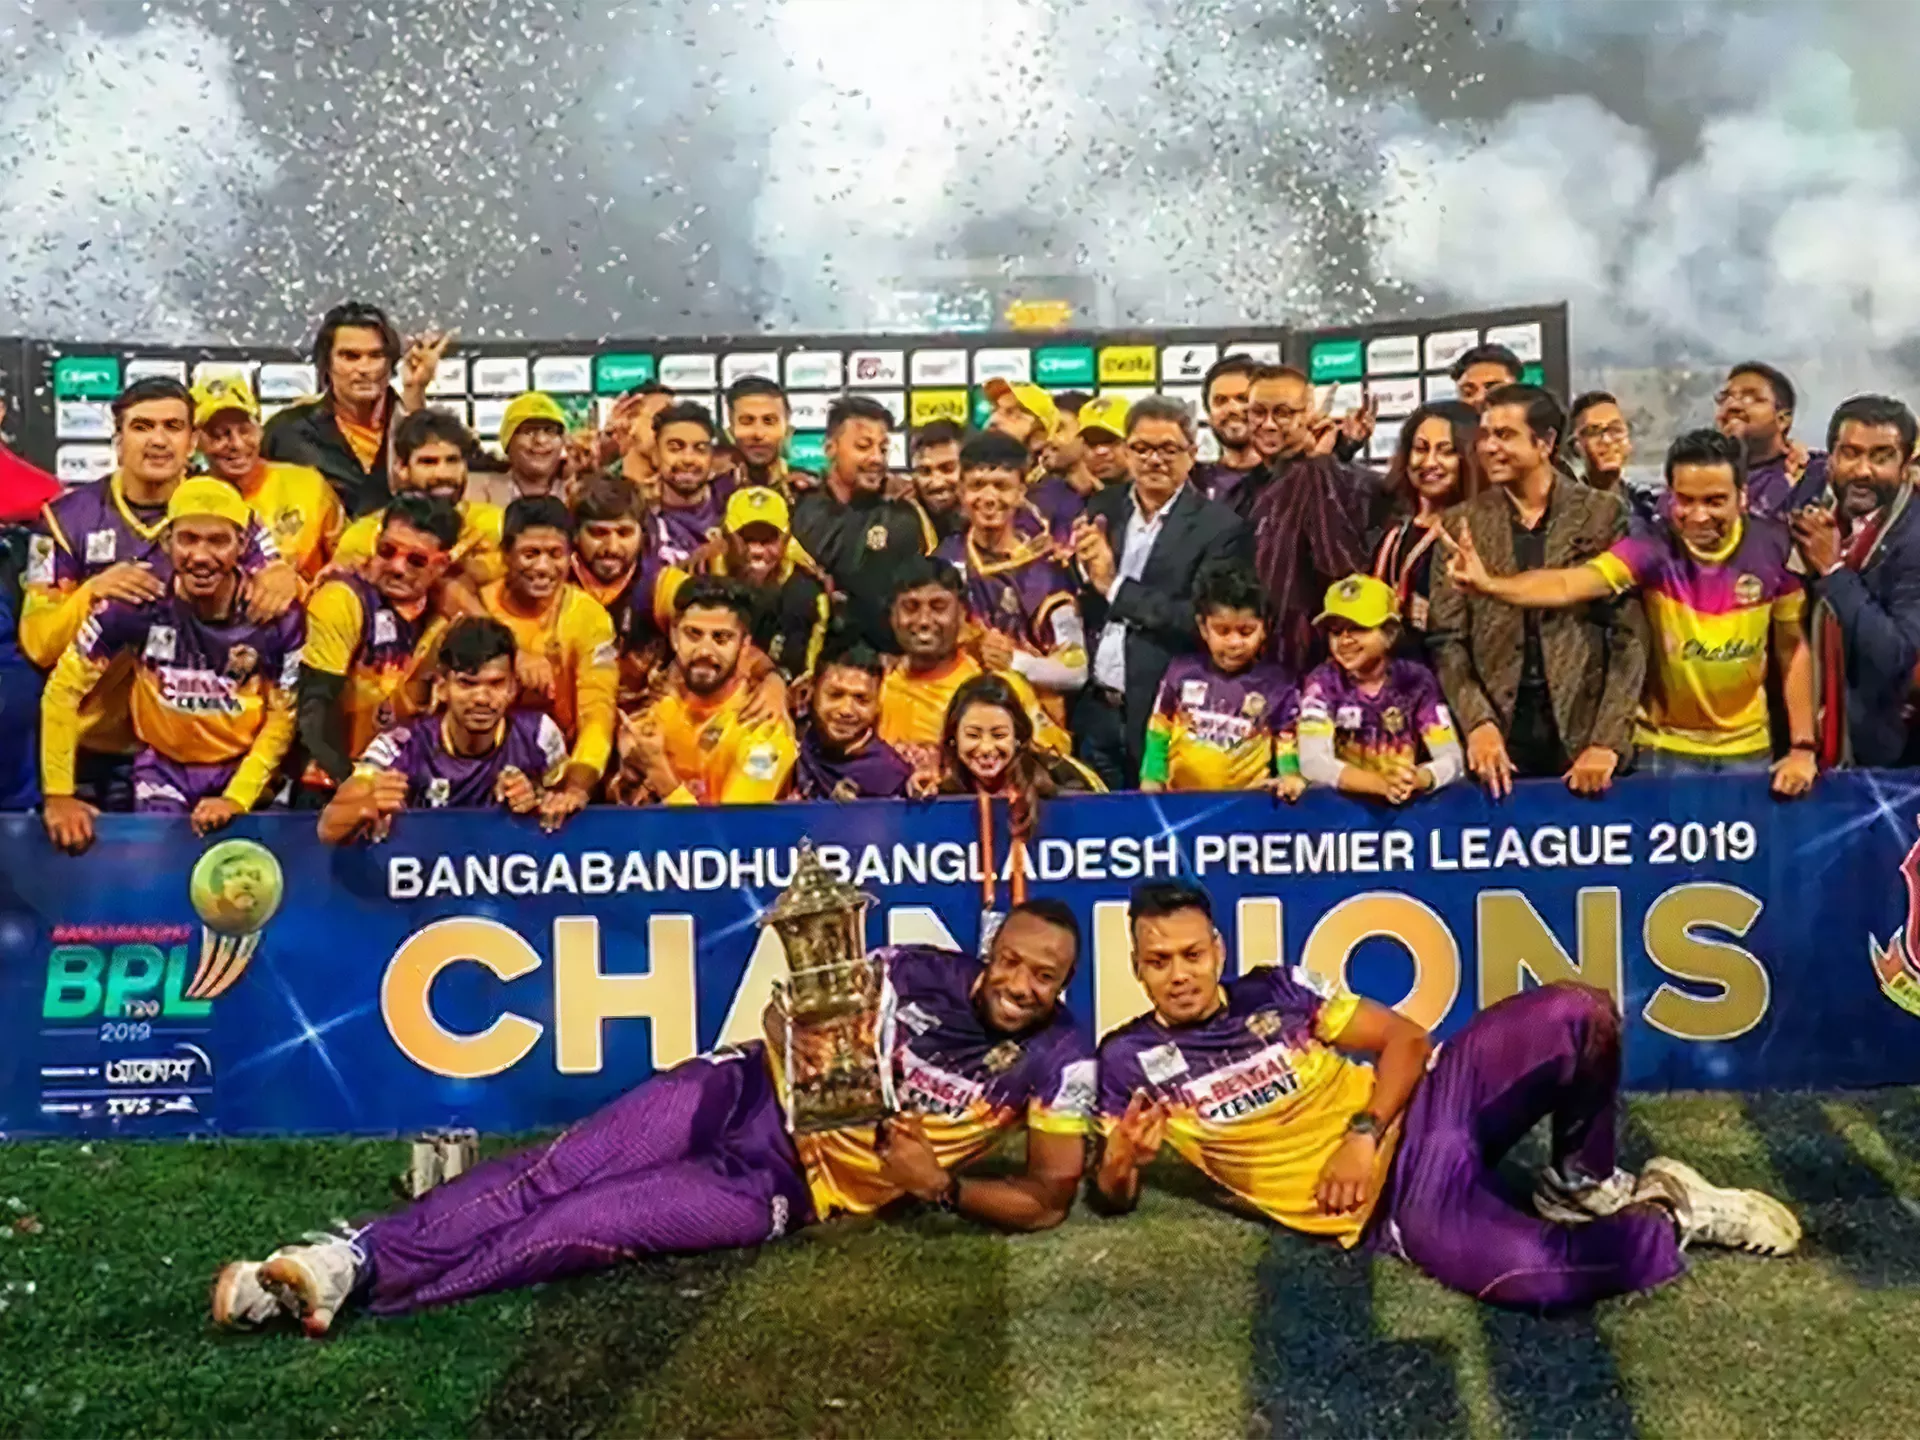 You can place bets on Bangladesh Premier League (BPL) after registering on the site